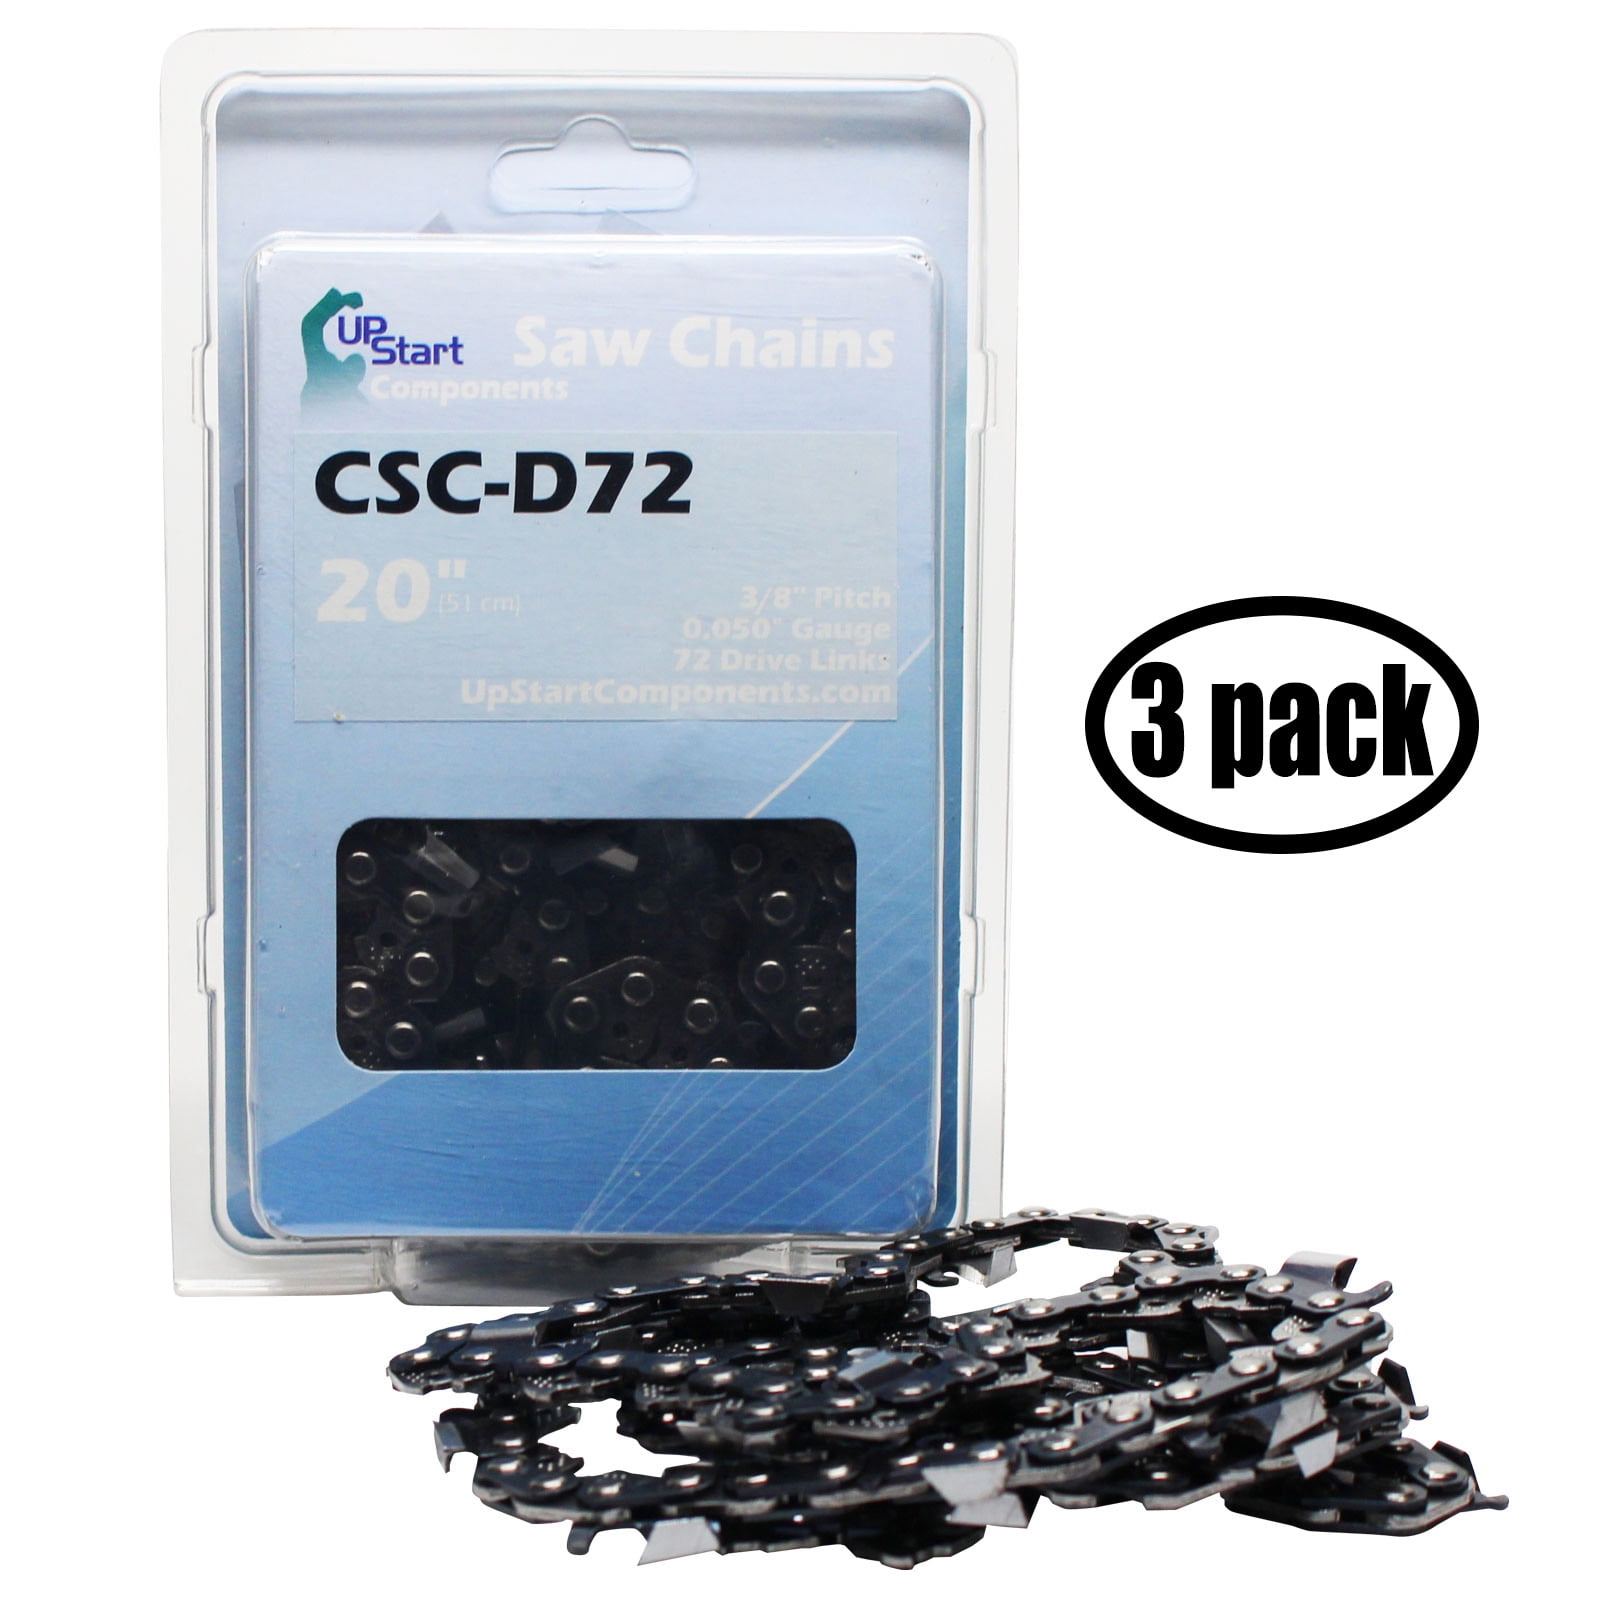 3X 20" Full Chisel Saw Chain for Jonsered CS2165 Chainsaws